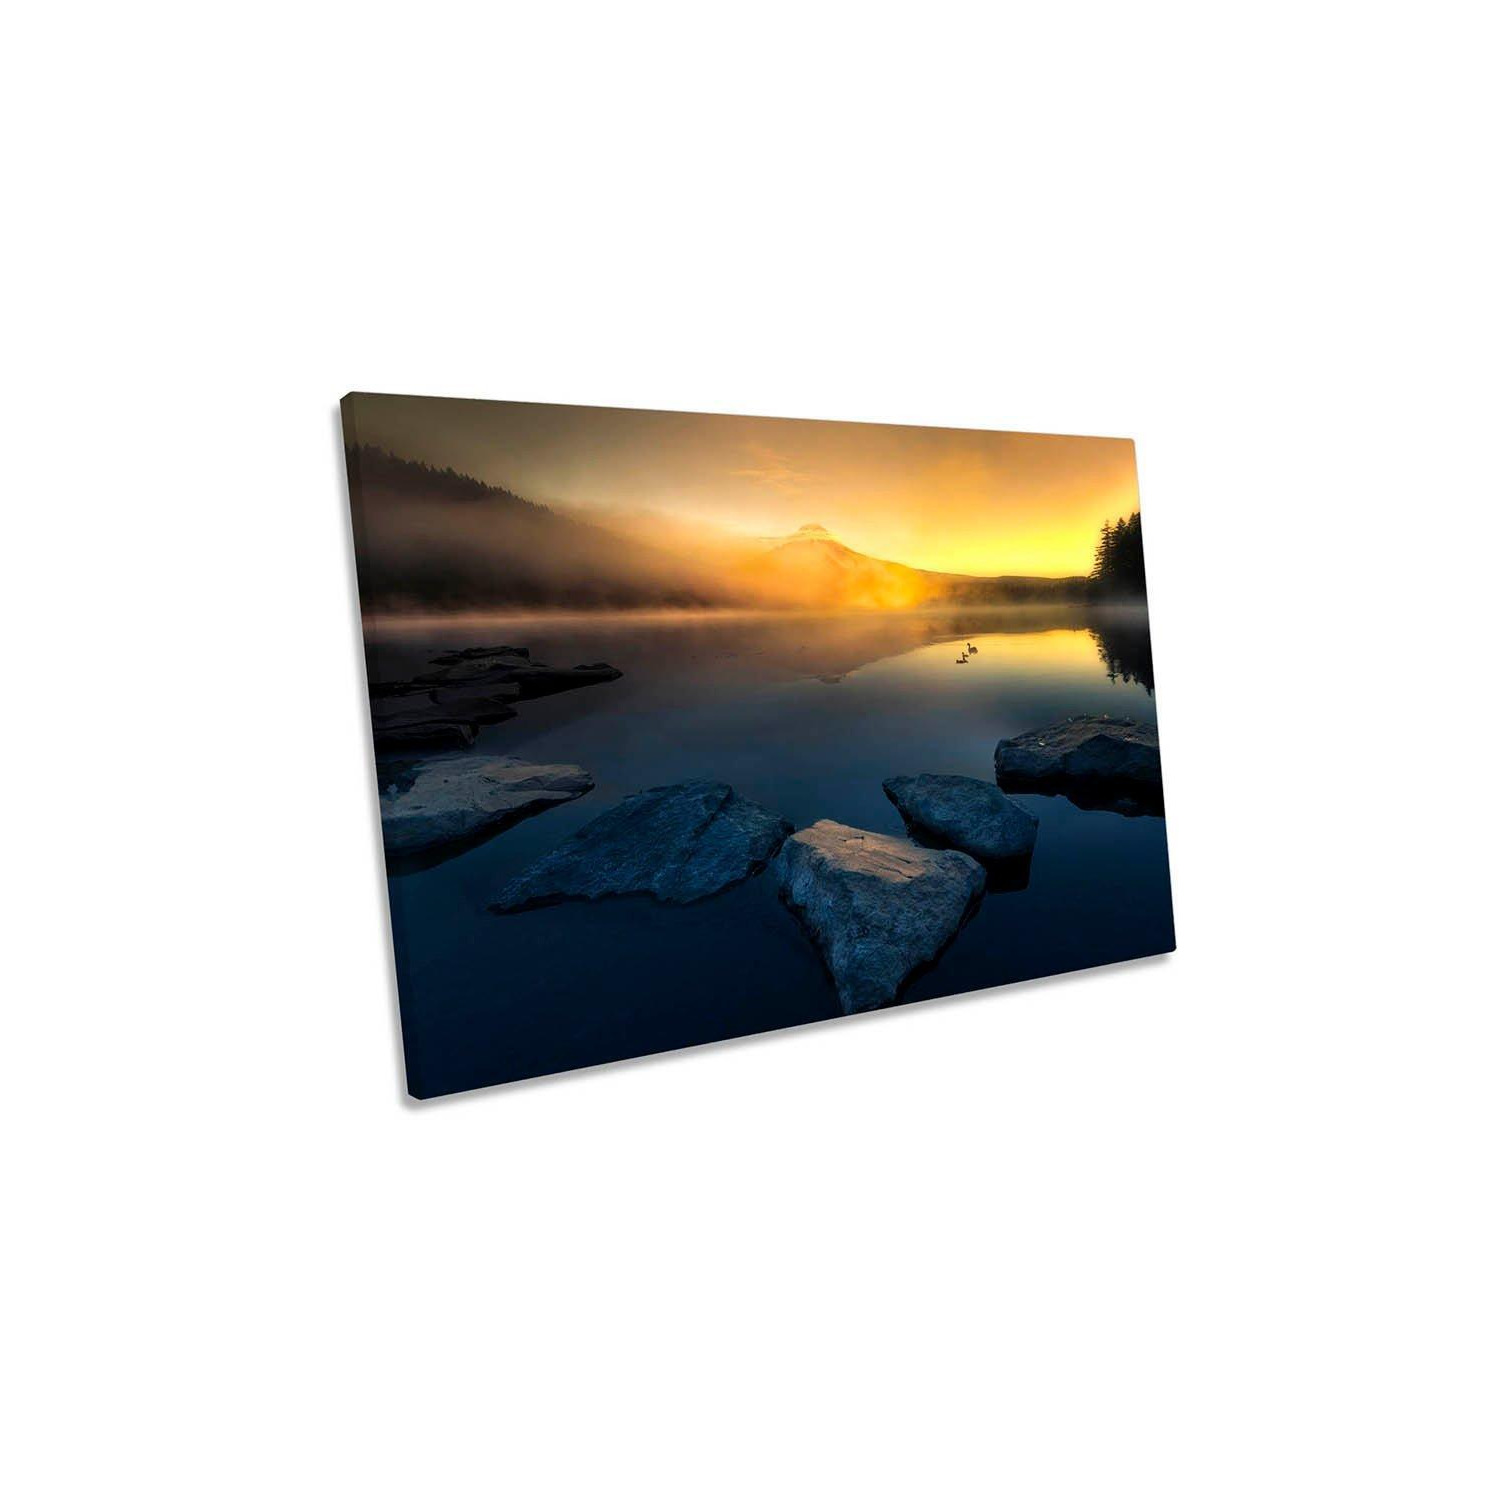 Golden Hour Calm Lake Ducks Mountain Canvas Wall Art Picture Print - image 1